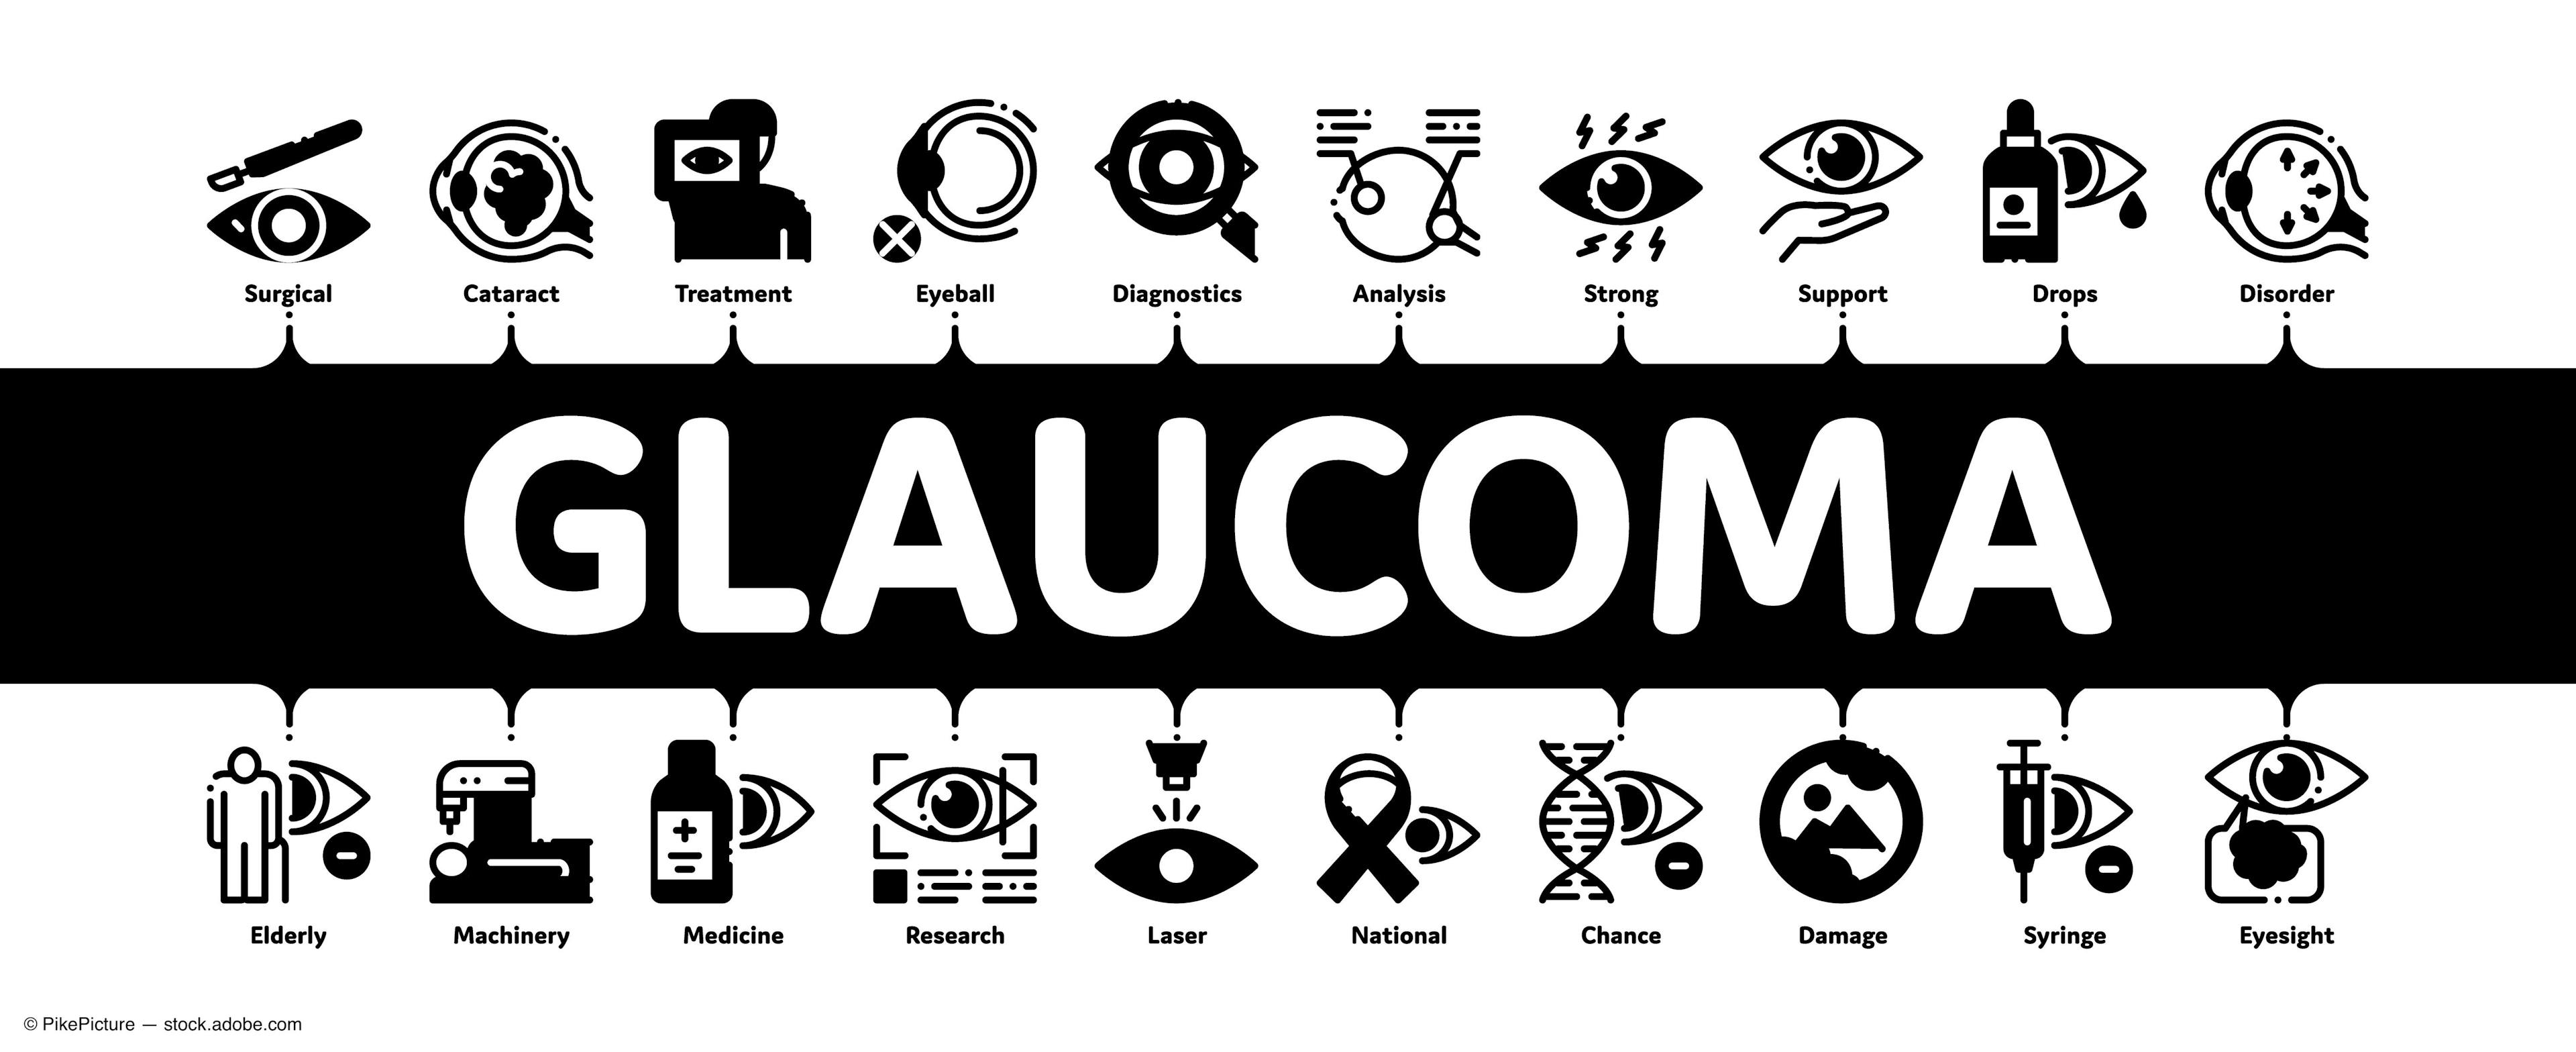 A menu of glaucoma treatments includes options to fit all scenarios